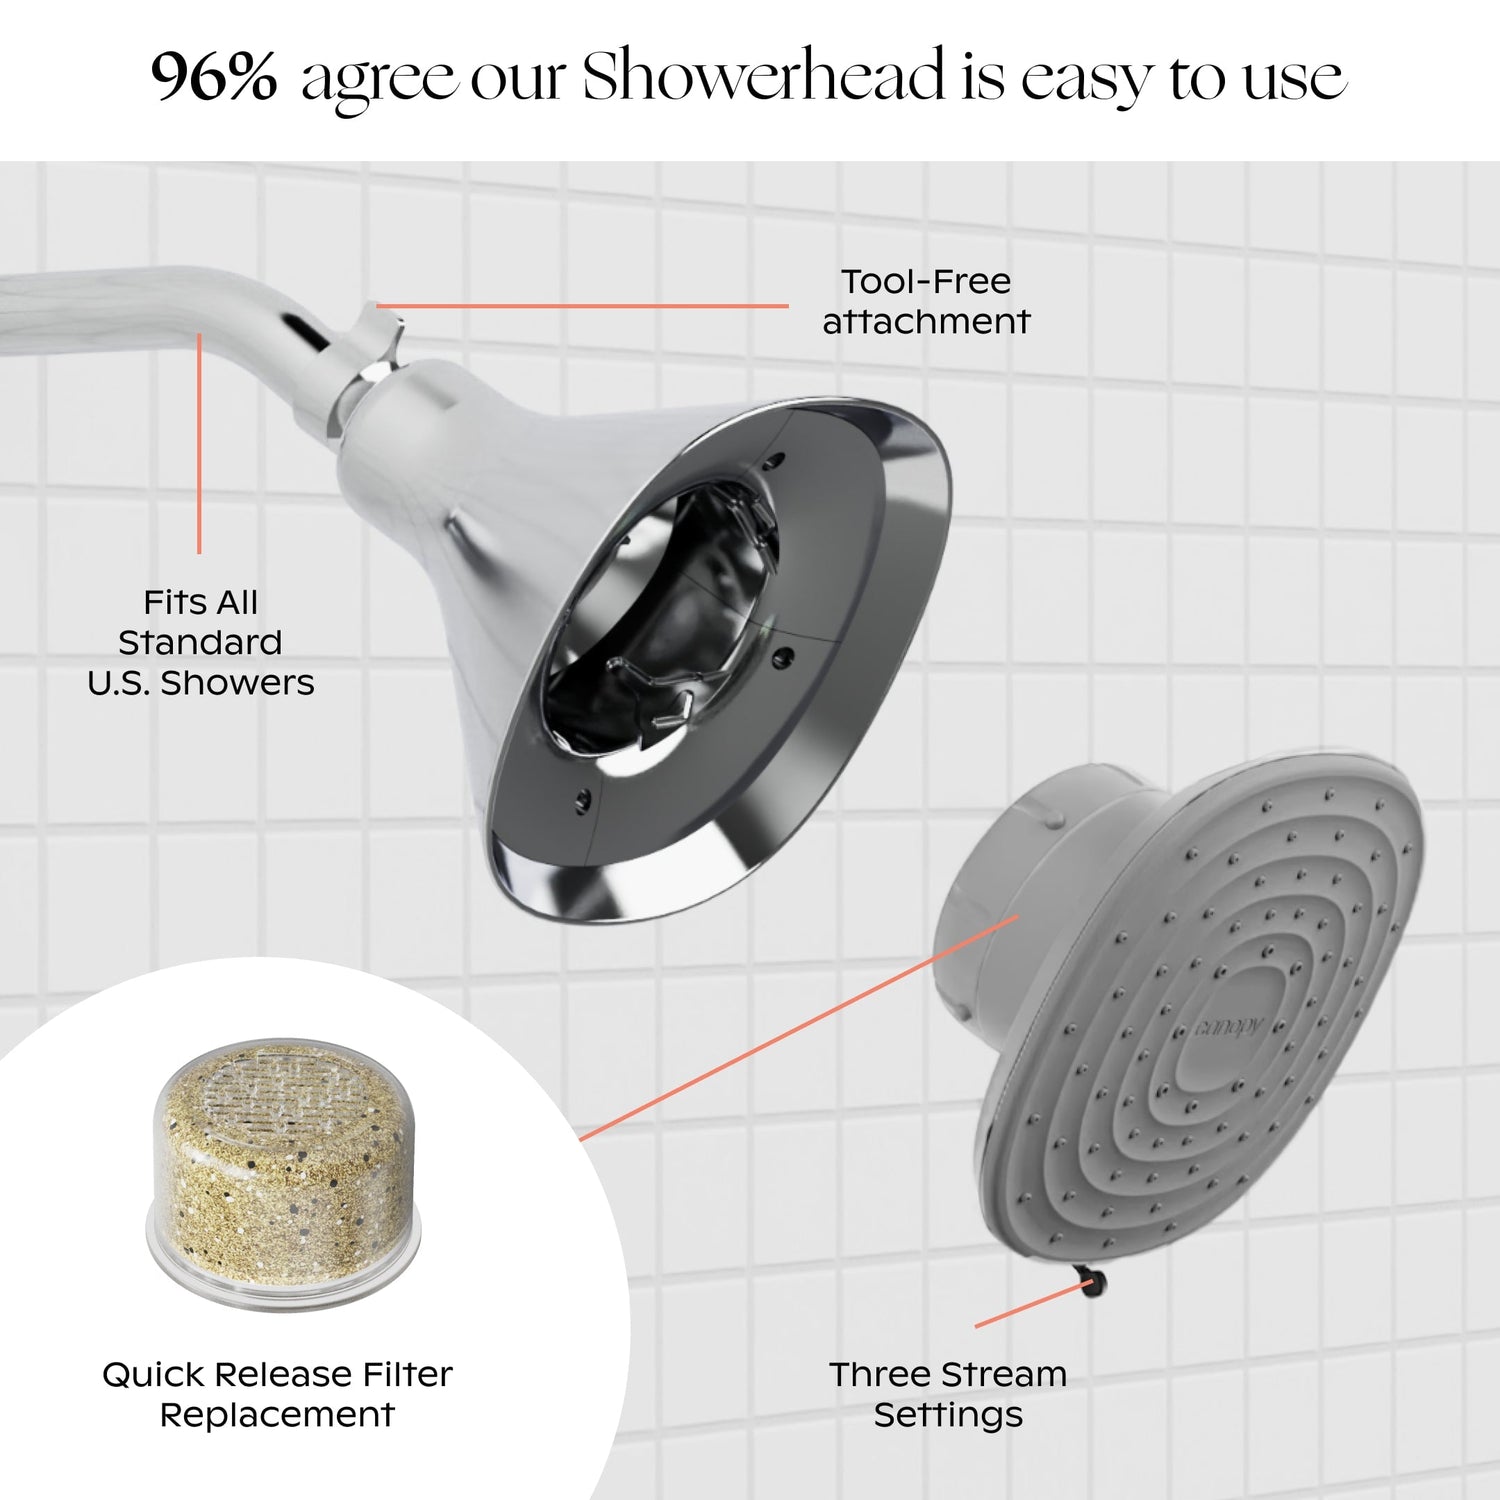 Filtered Showerhead Bundle | Lifestyle, 96% agree our Showerhead is easy to use